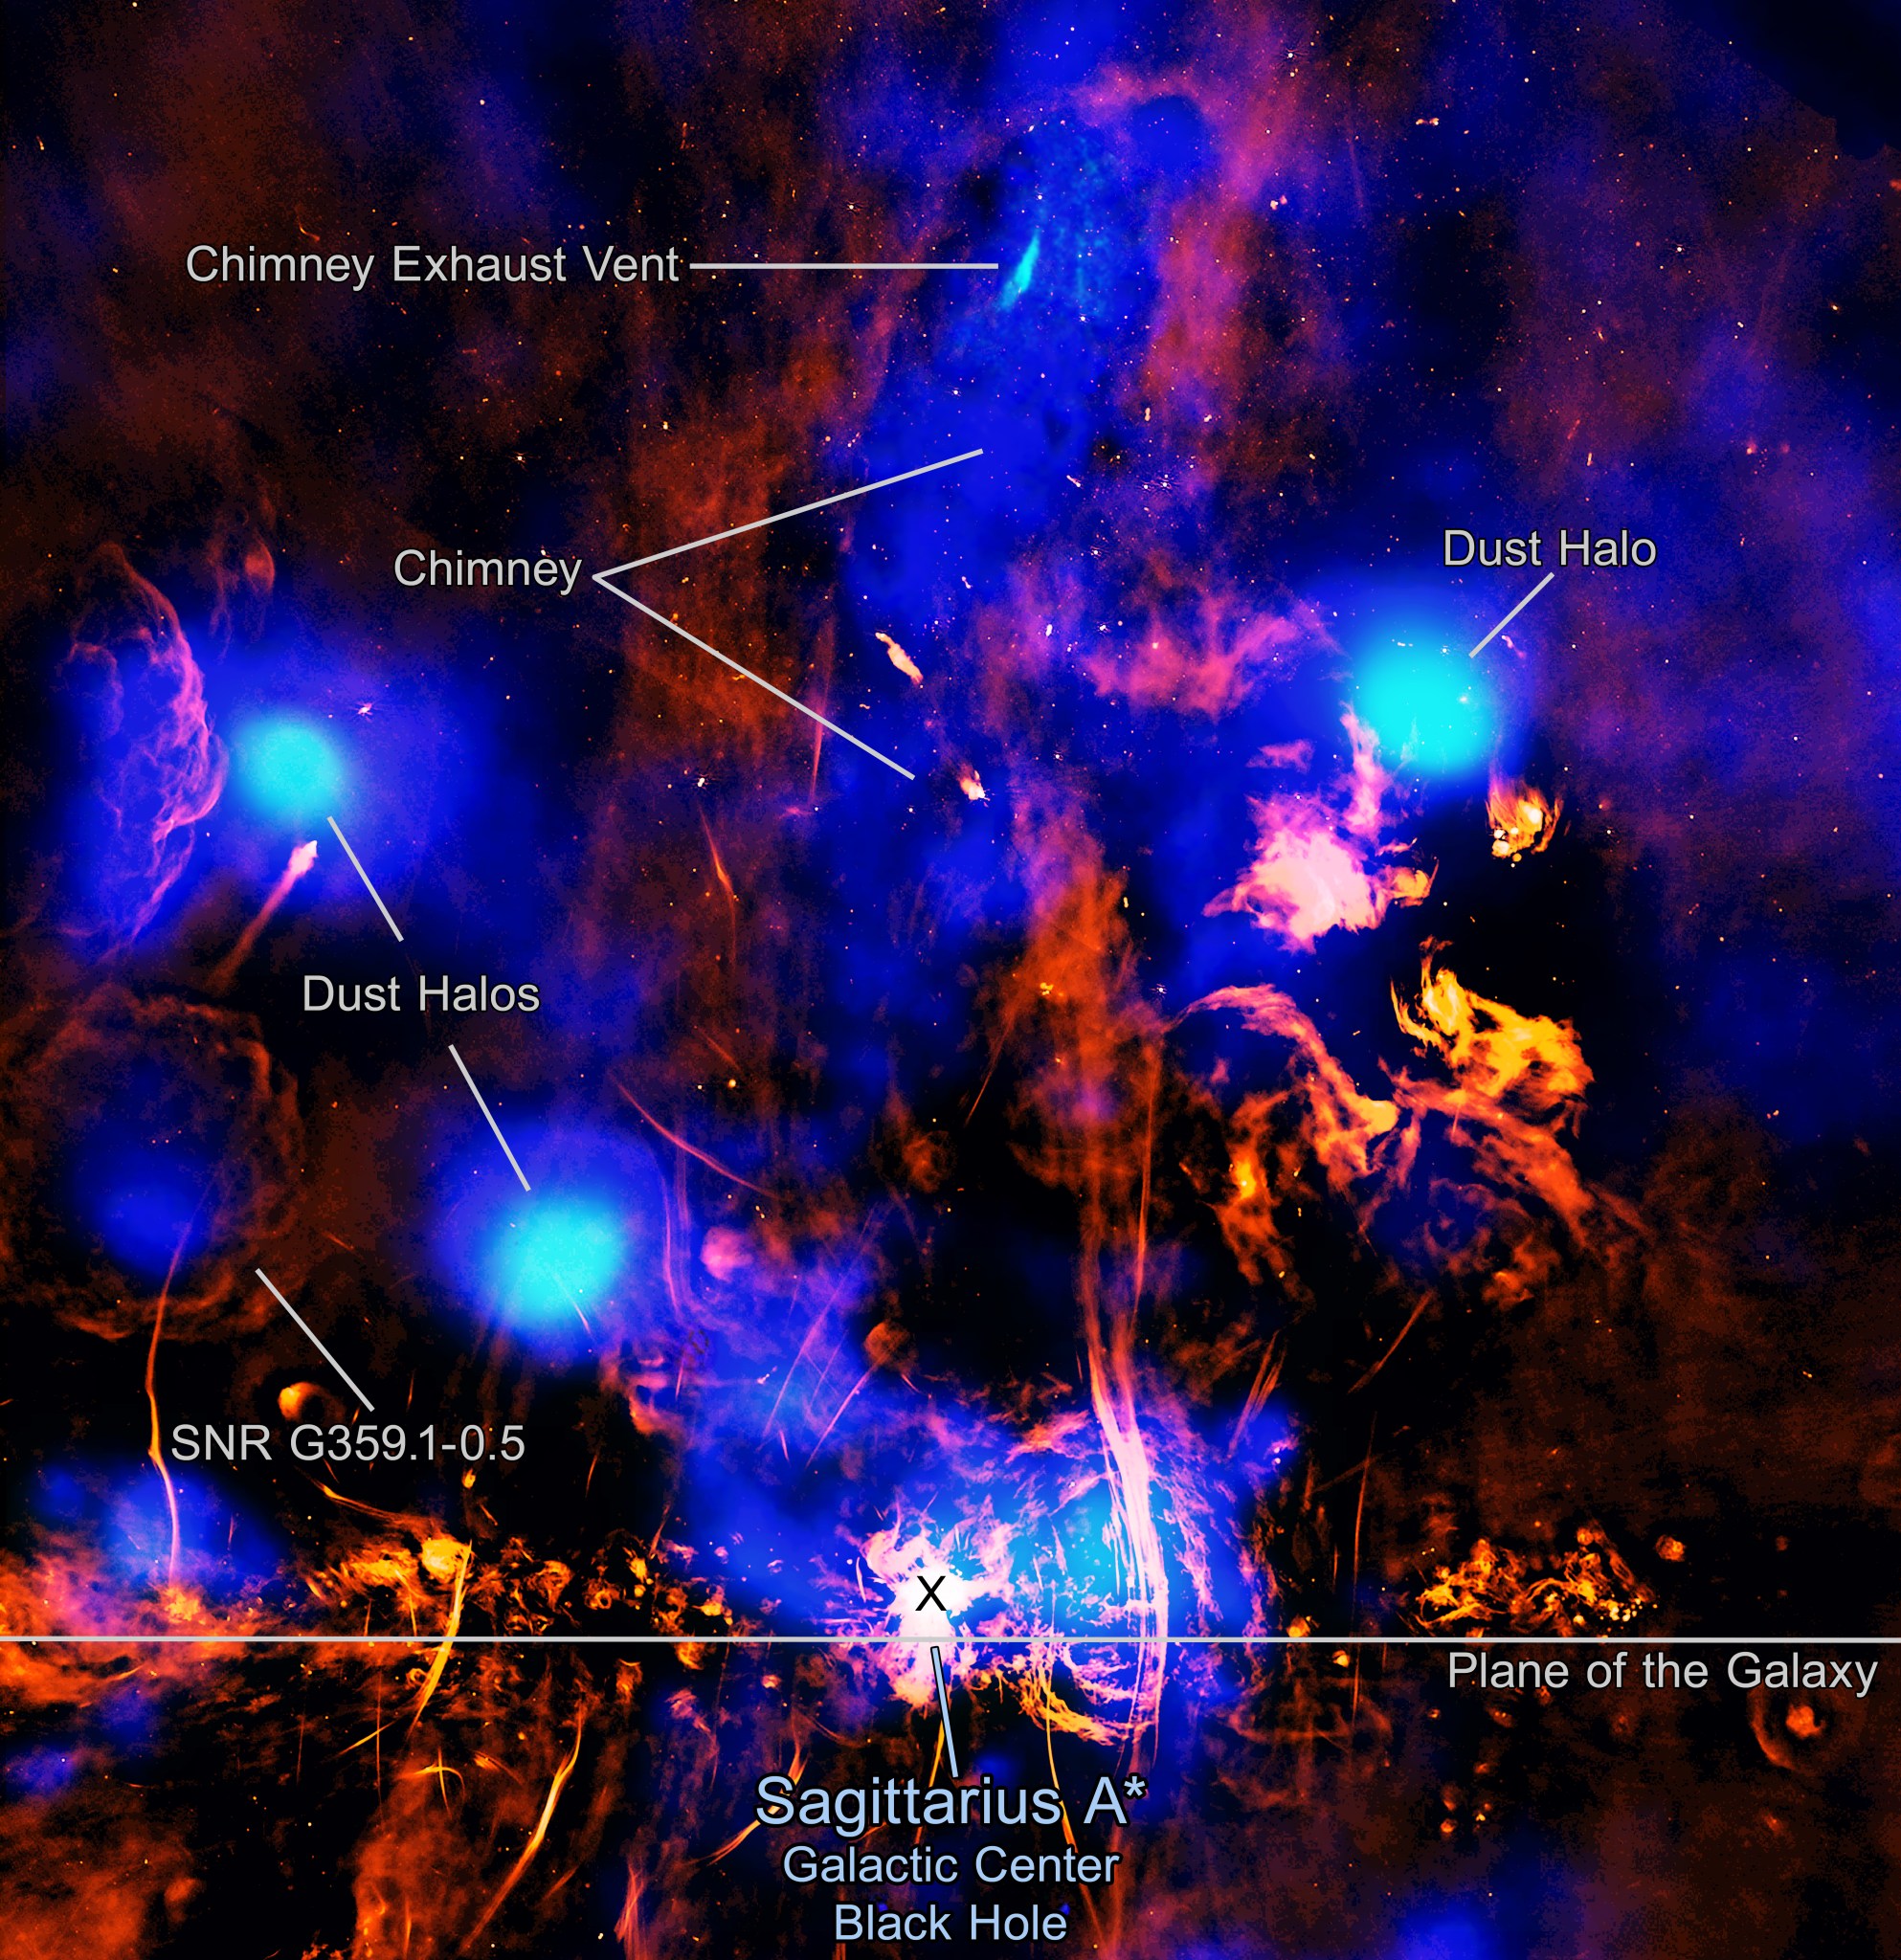 Chandra data reveal several X-ray ridges that astronomers think are the walls of a tunnel, shaped like a cylinder, which helps funnel hot gas as it moves away from the Galactic Center. This “exhaust vent” is connected to a previously-discovered “chimney” and helps release hot gas generated by the supermassive black hole at the Galactic Center. In this image, Chandra’s X-rays are shown with radio data from MeerKAT to demonstrate the chimney and vent, with a closer-in view of the exhaust vent as well. The supermassive black hole is near the bottom of the image.